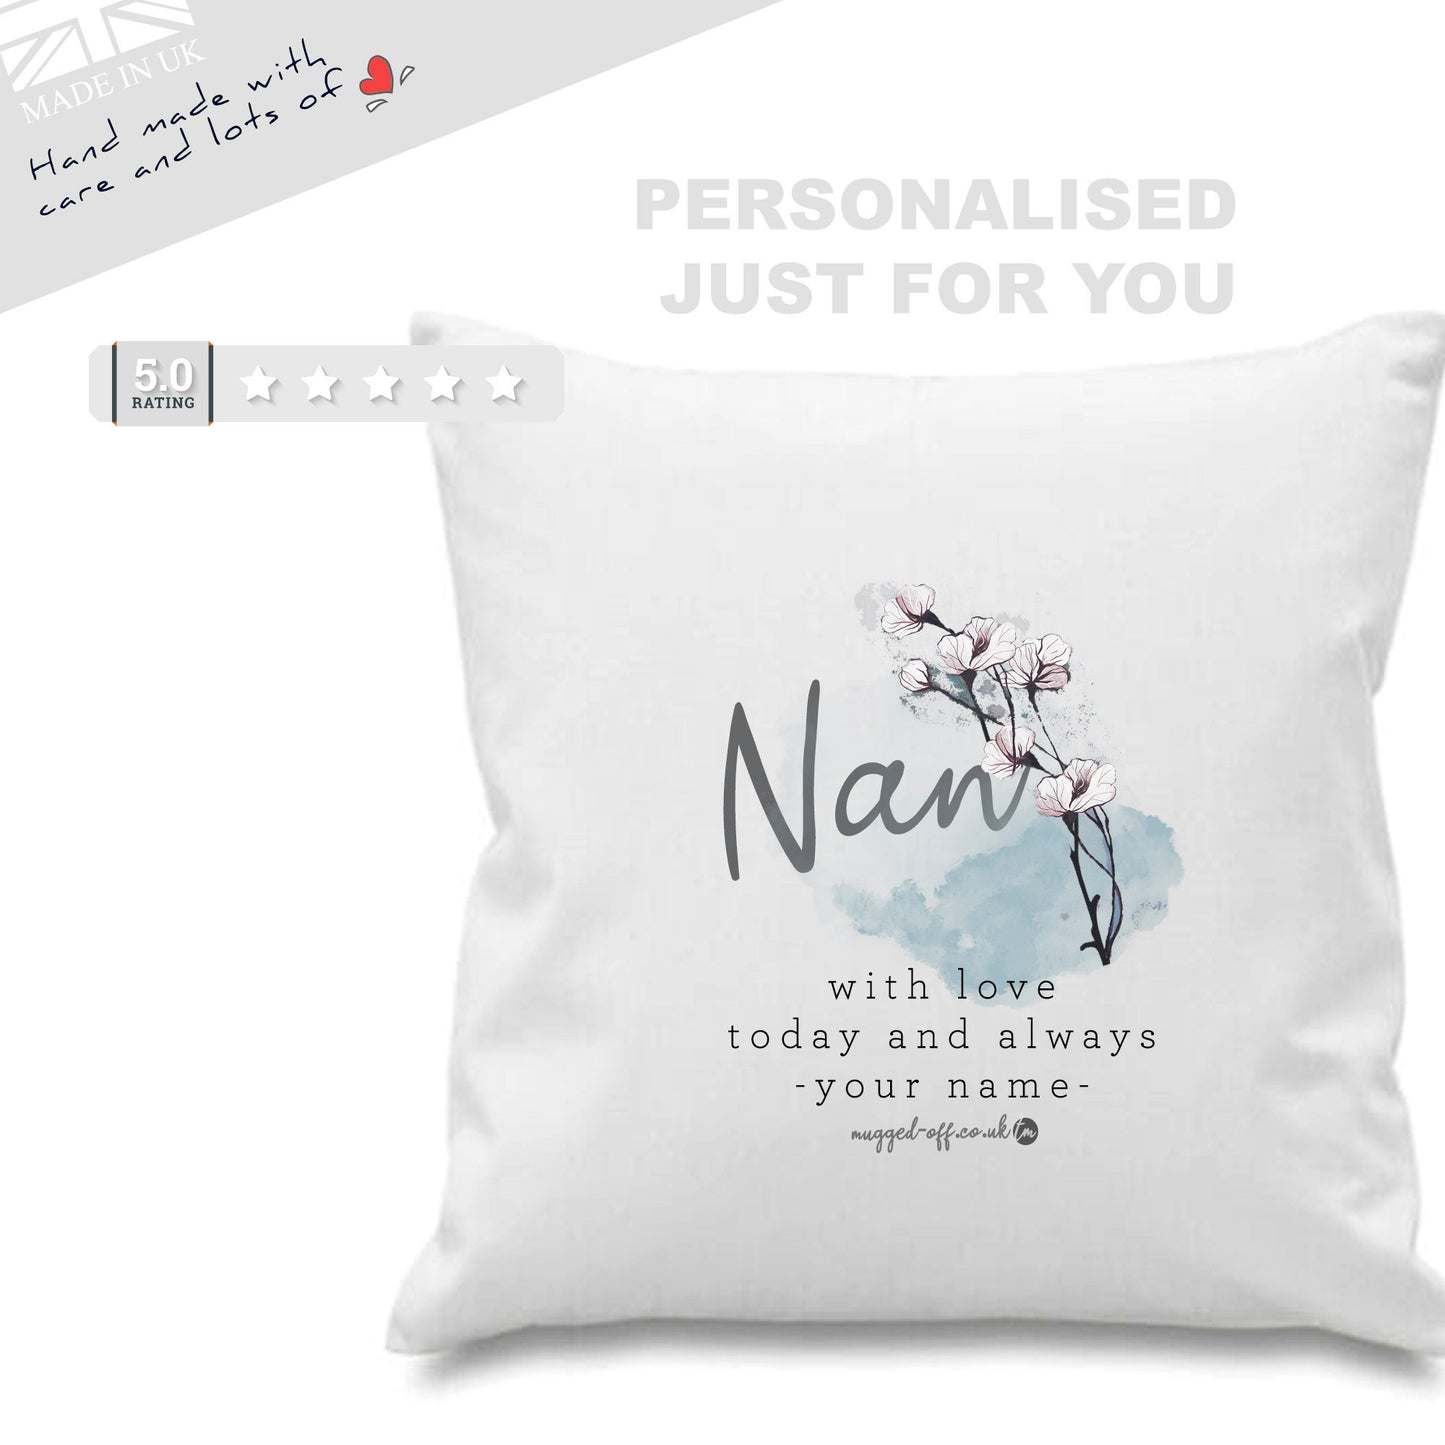 Nan Cushion Cover - cushion covers personalised just for your Nan birthday Christmas mothers day gifts